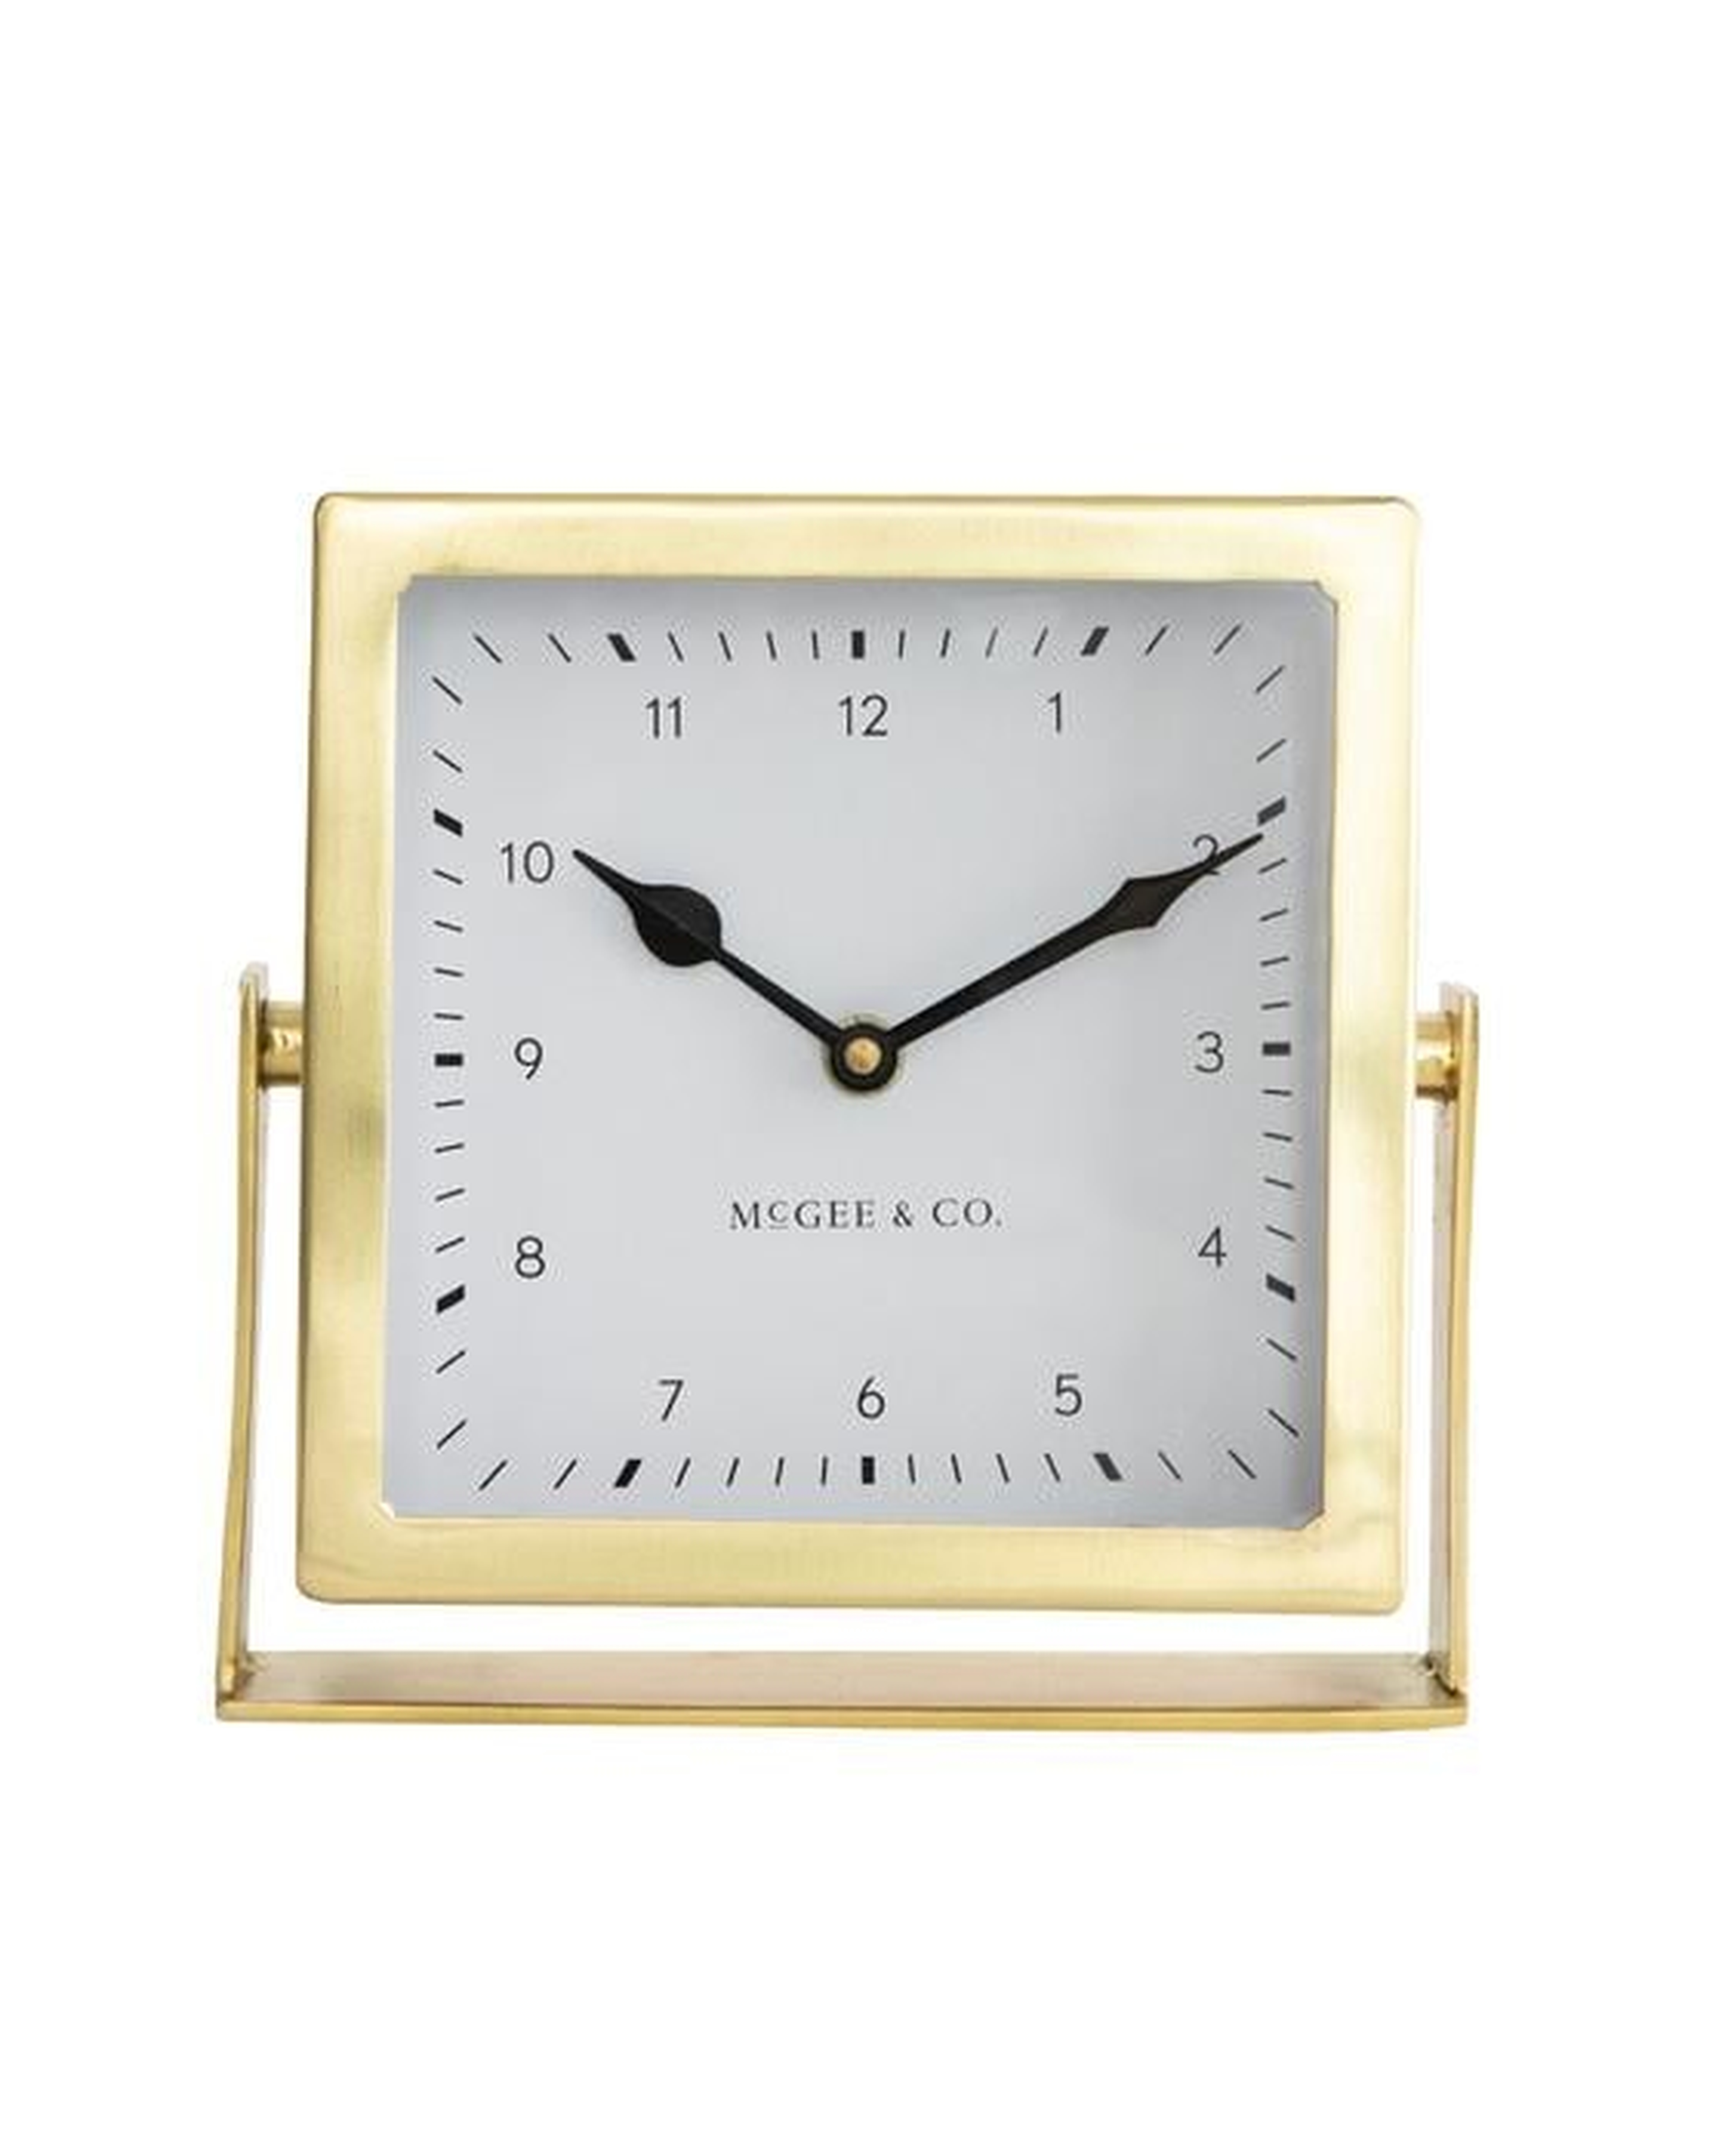 Posey Table Clock - McGee & Co.